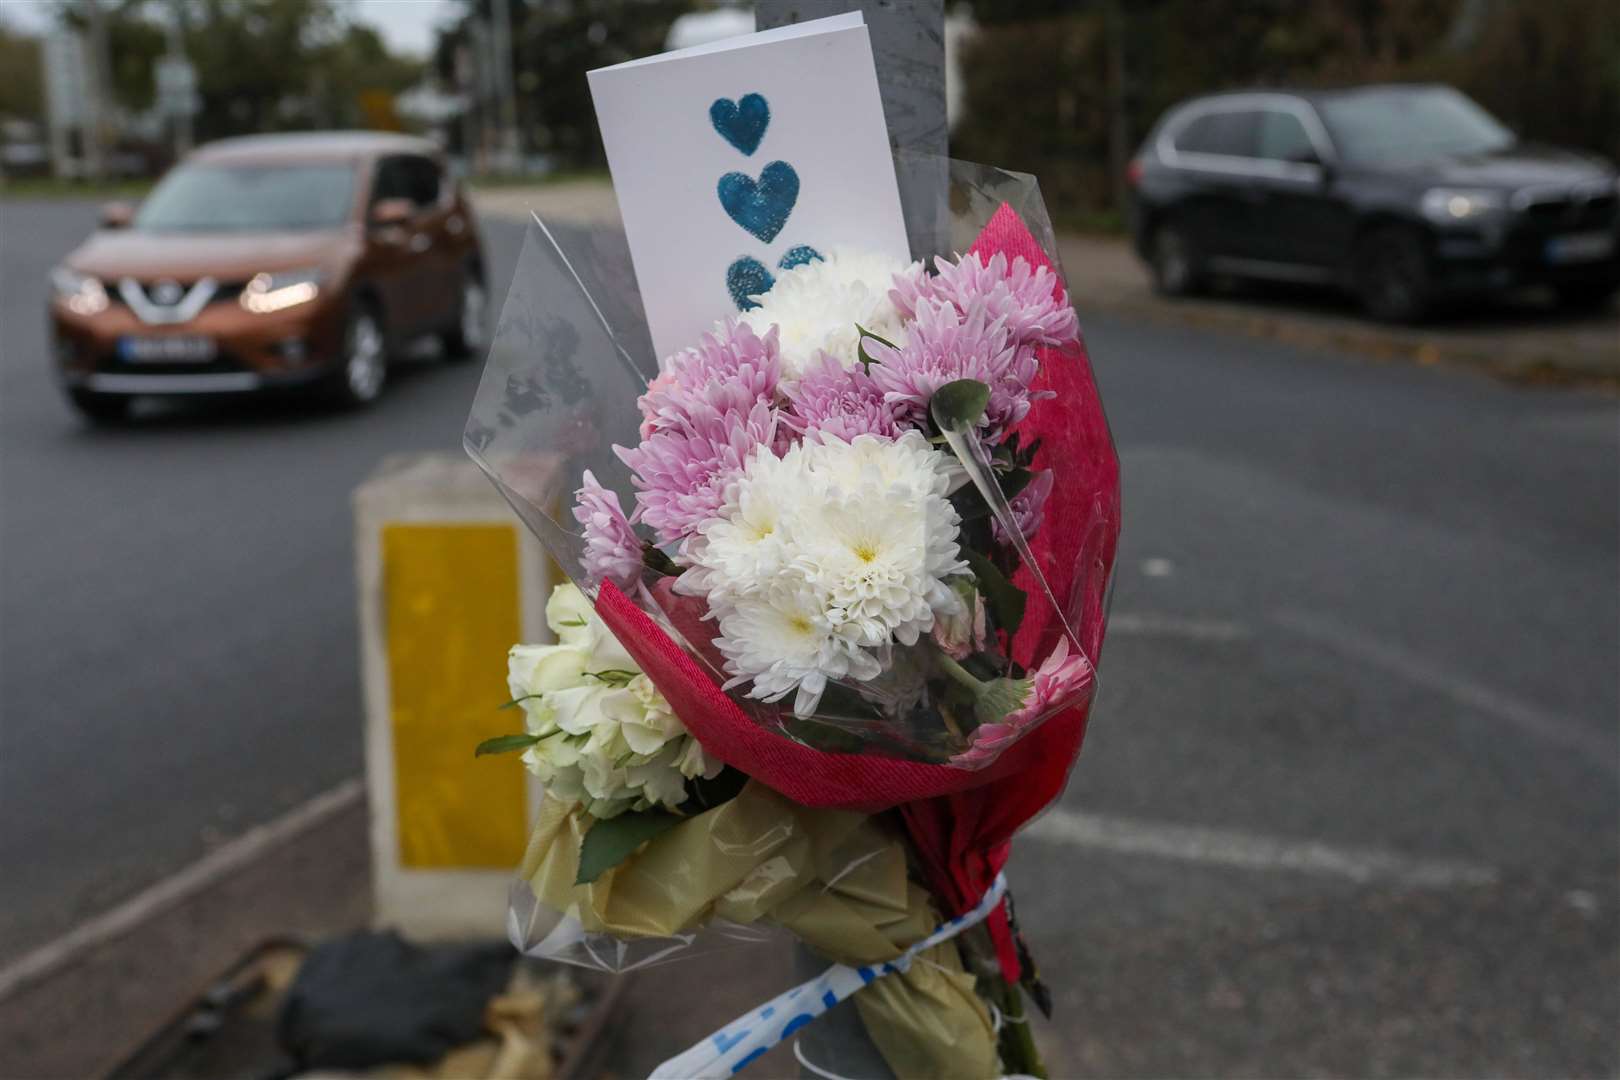 Tributes were left at the scene of the fatal accident. Picture: UKNIP